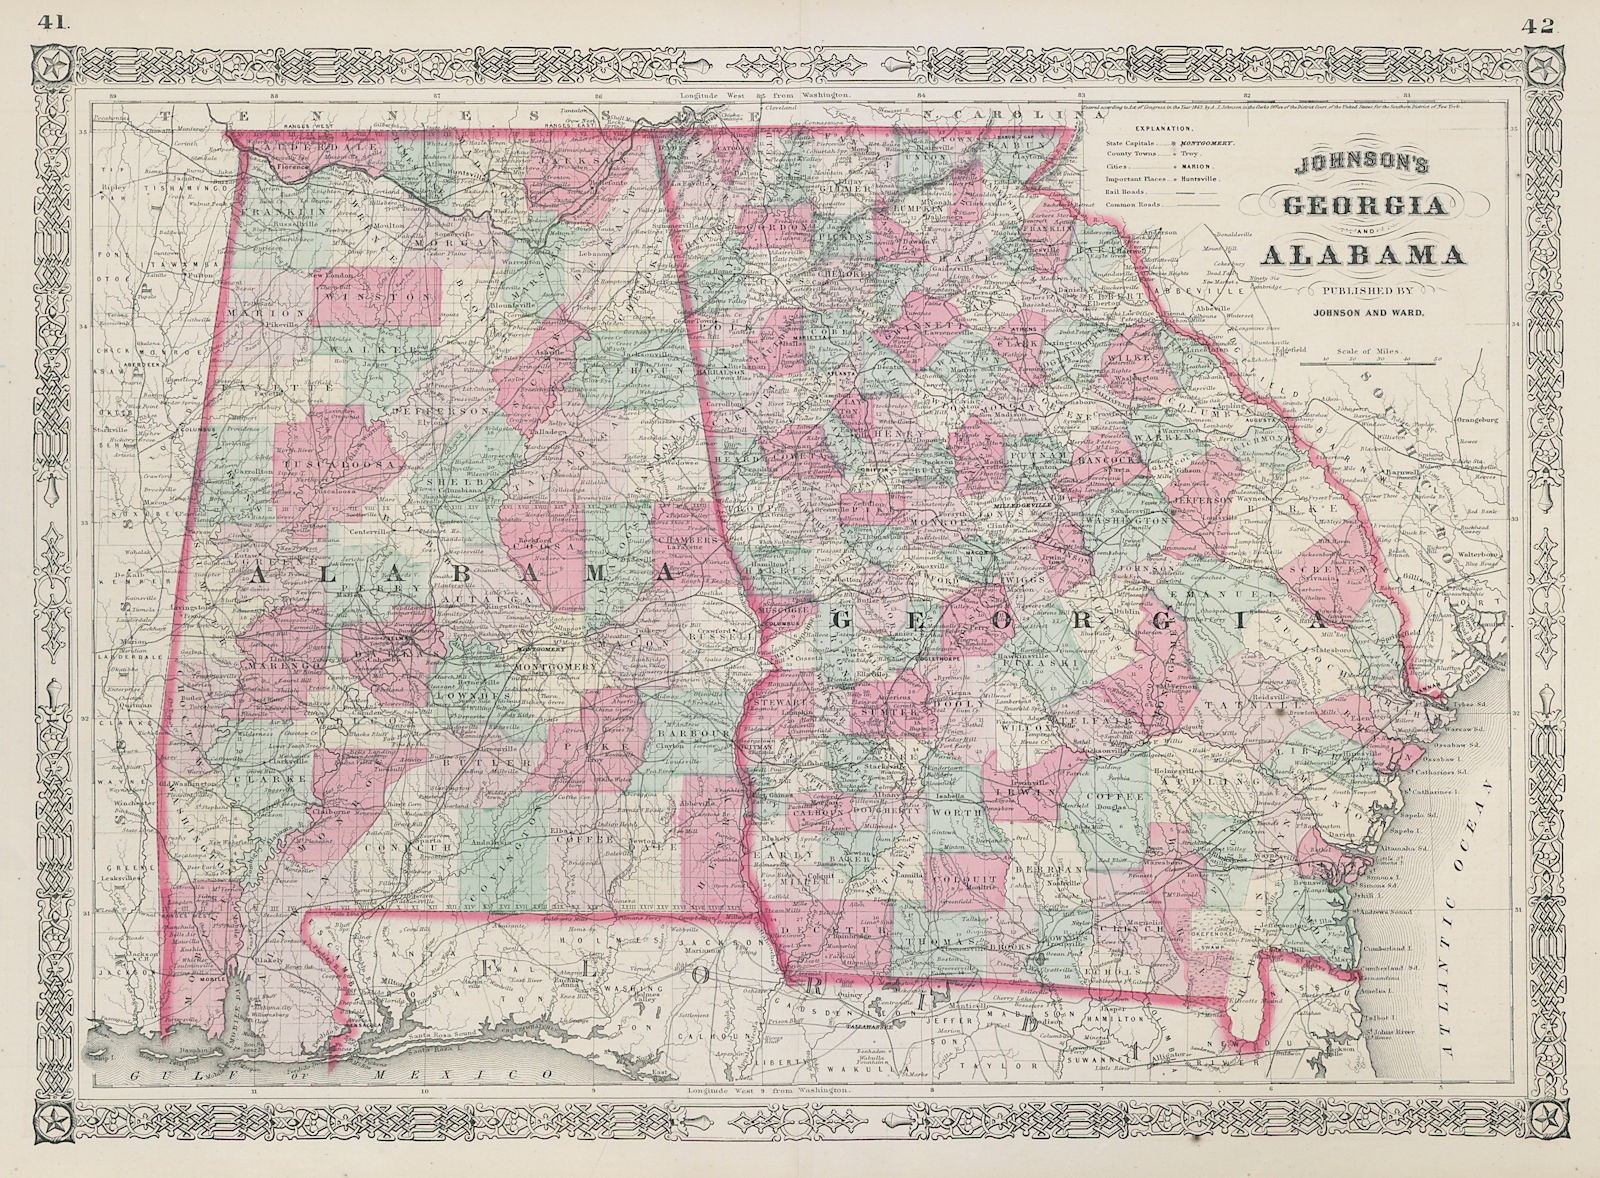 Associate Product Johnson's Georgia & Alabama. US state map showing counties 1865 old